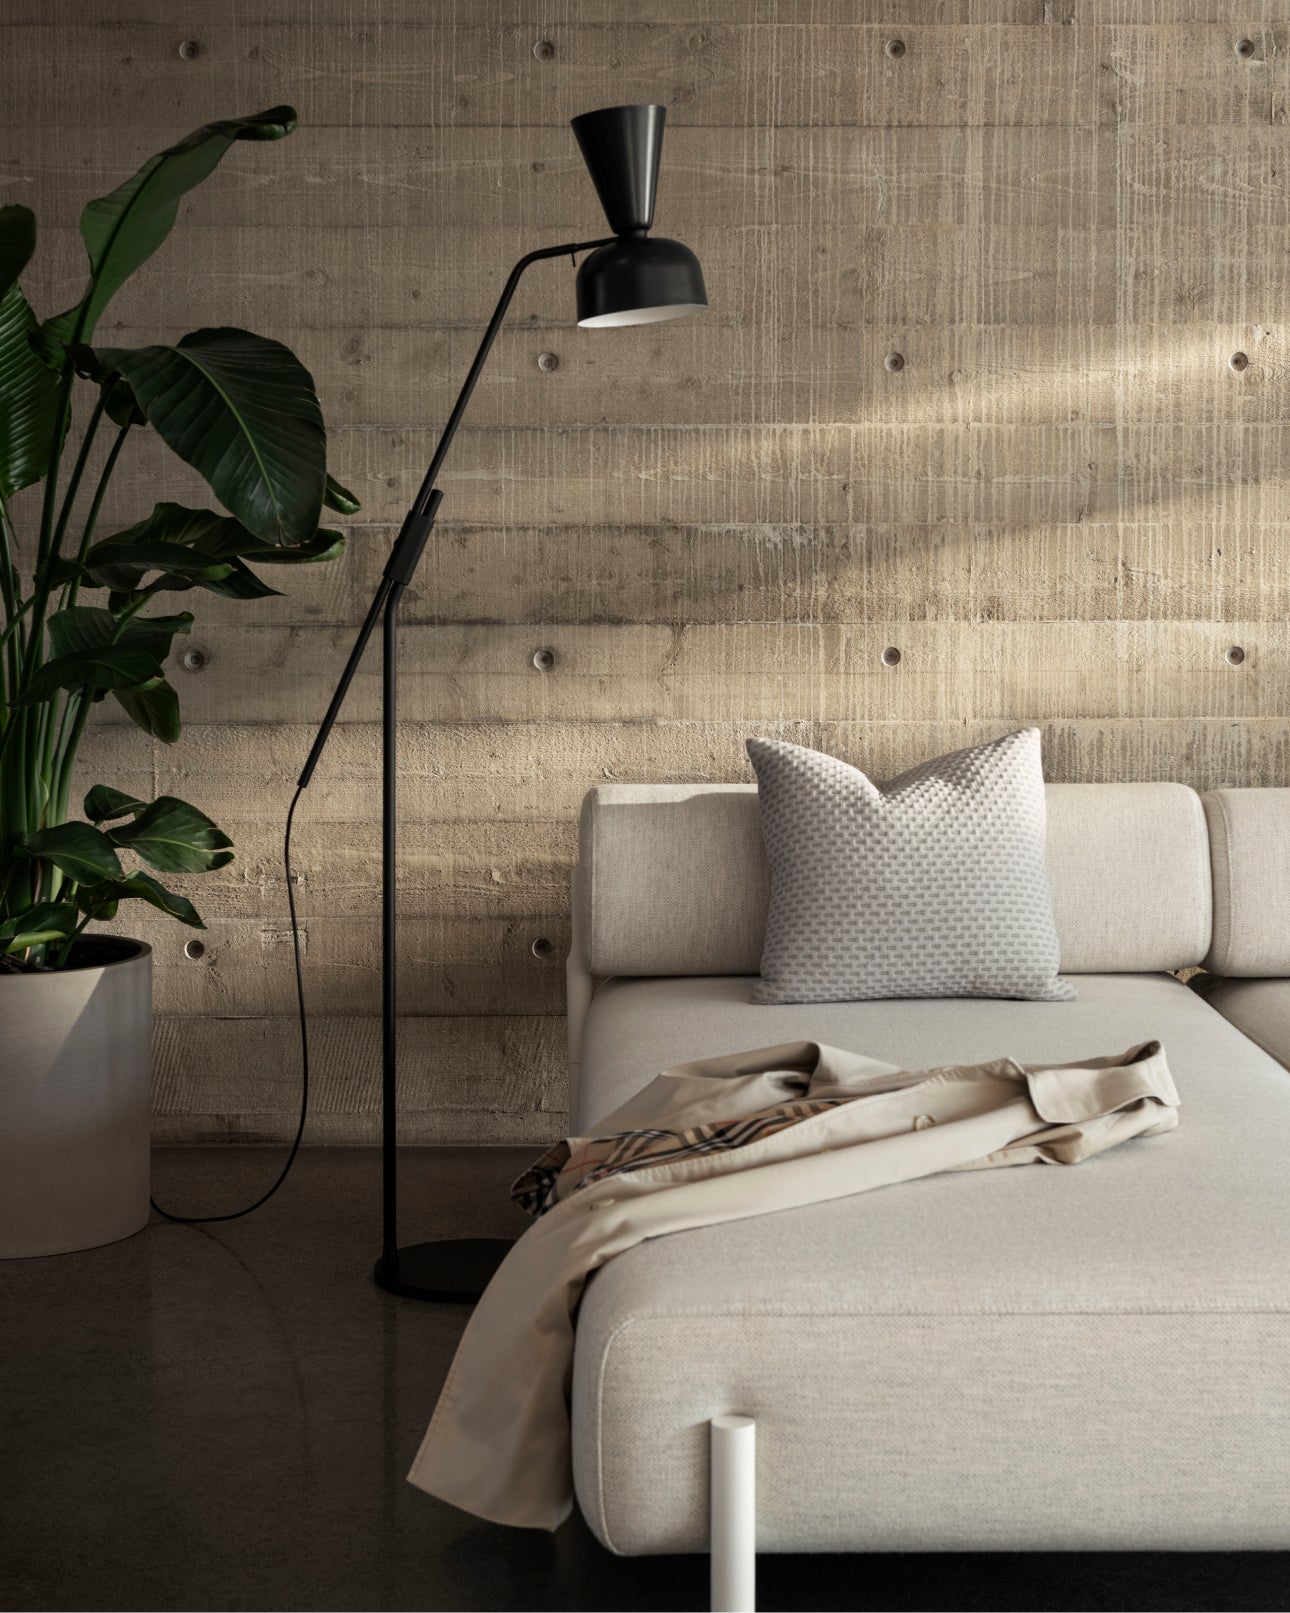 A lounge scene featuring the Alphabeta Floor Lamp standing next to a Palo Sofa.